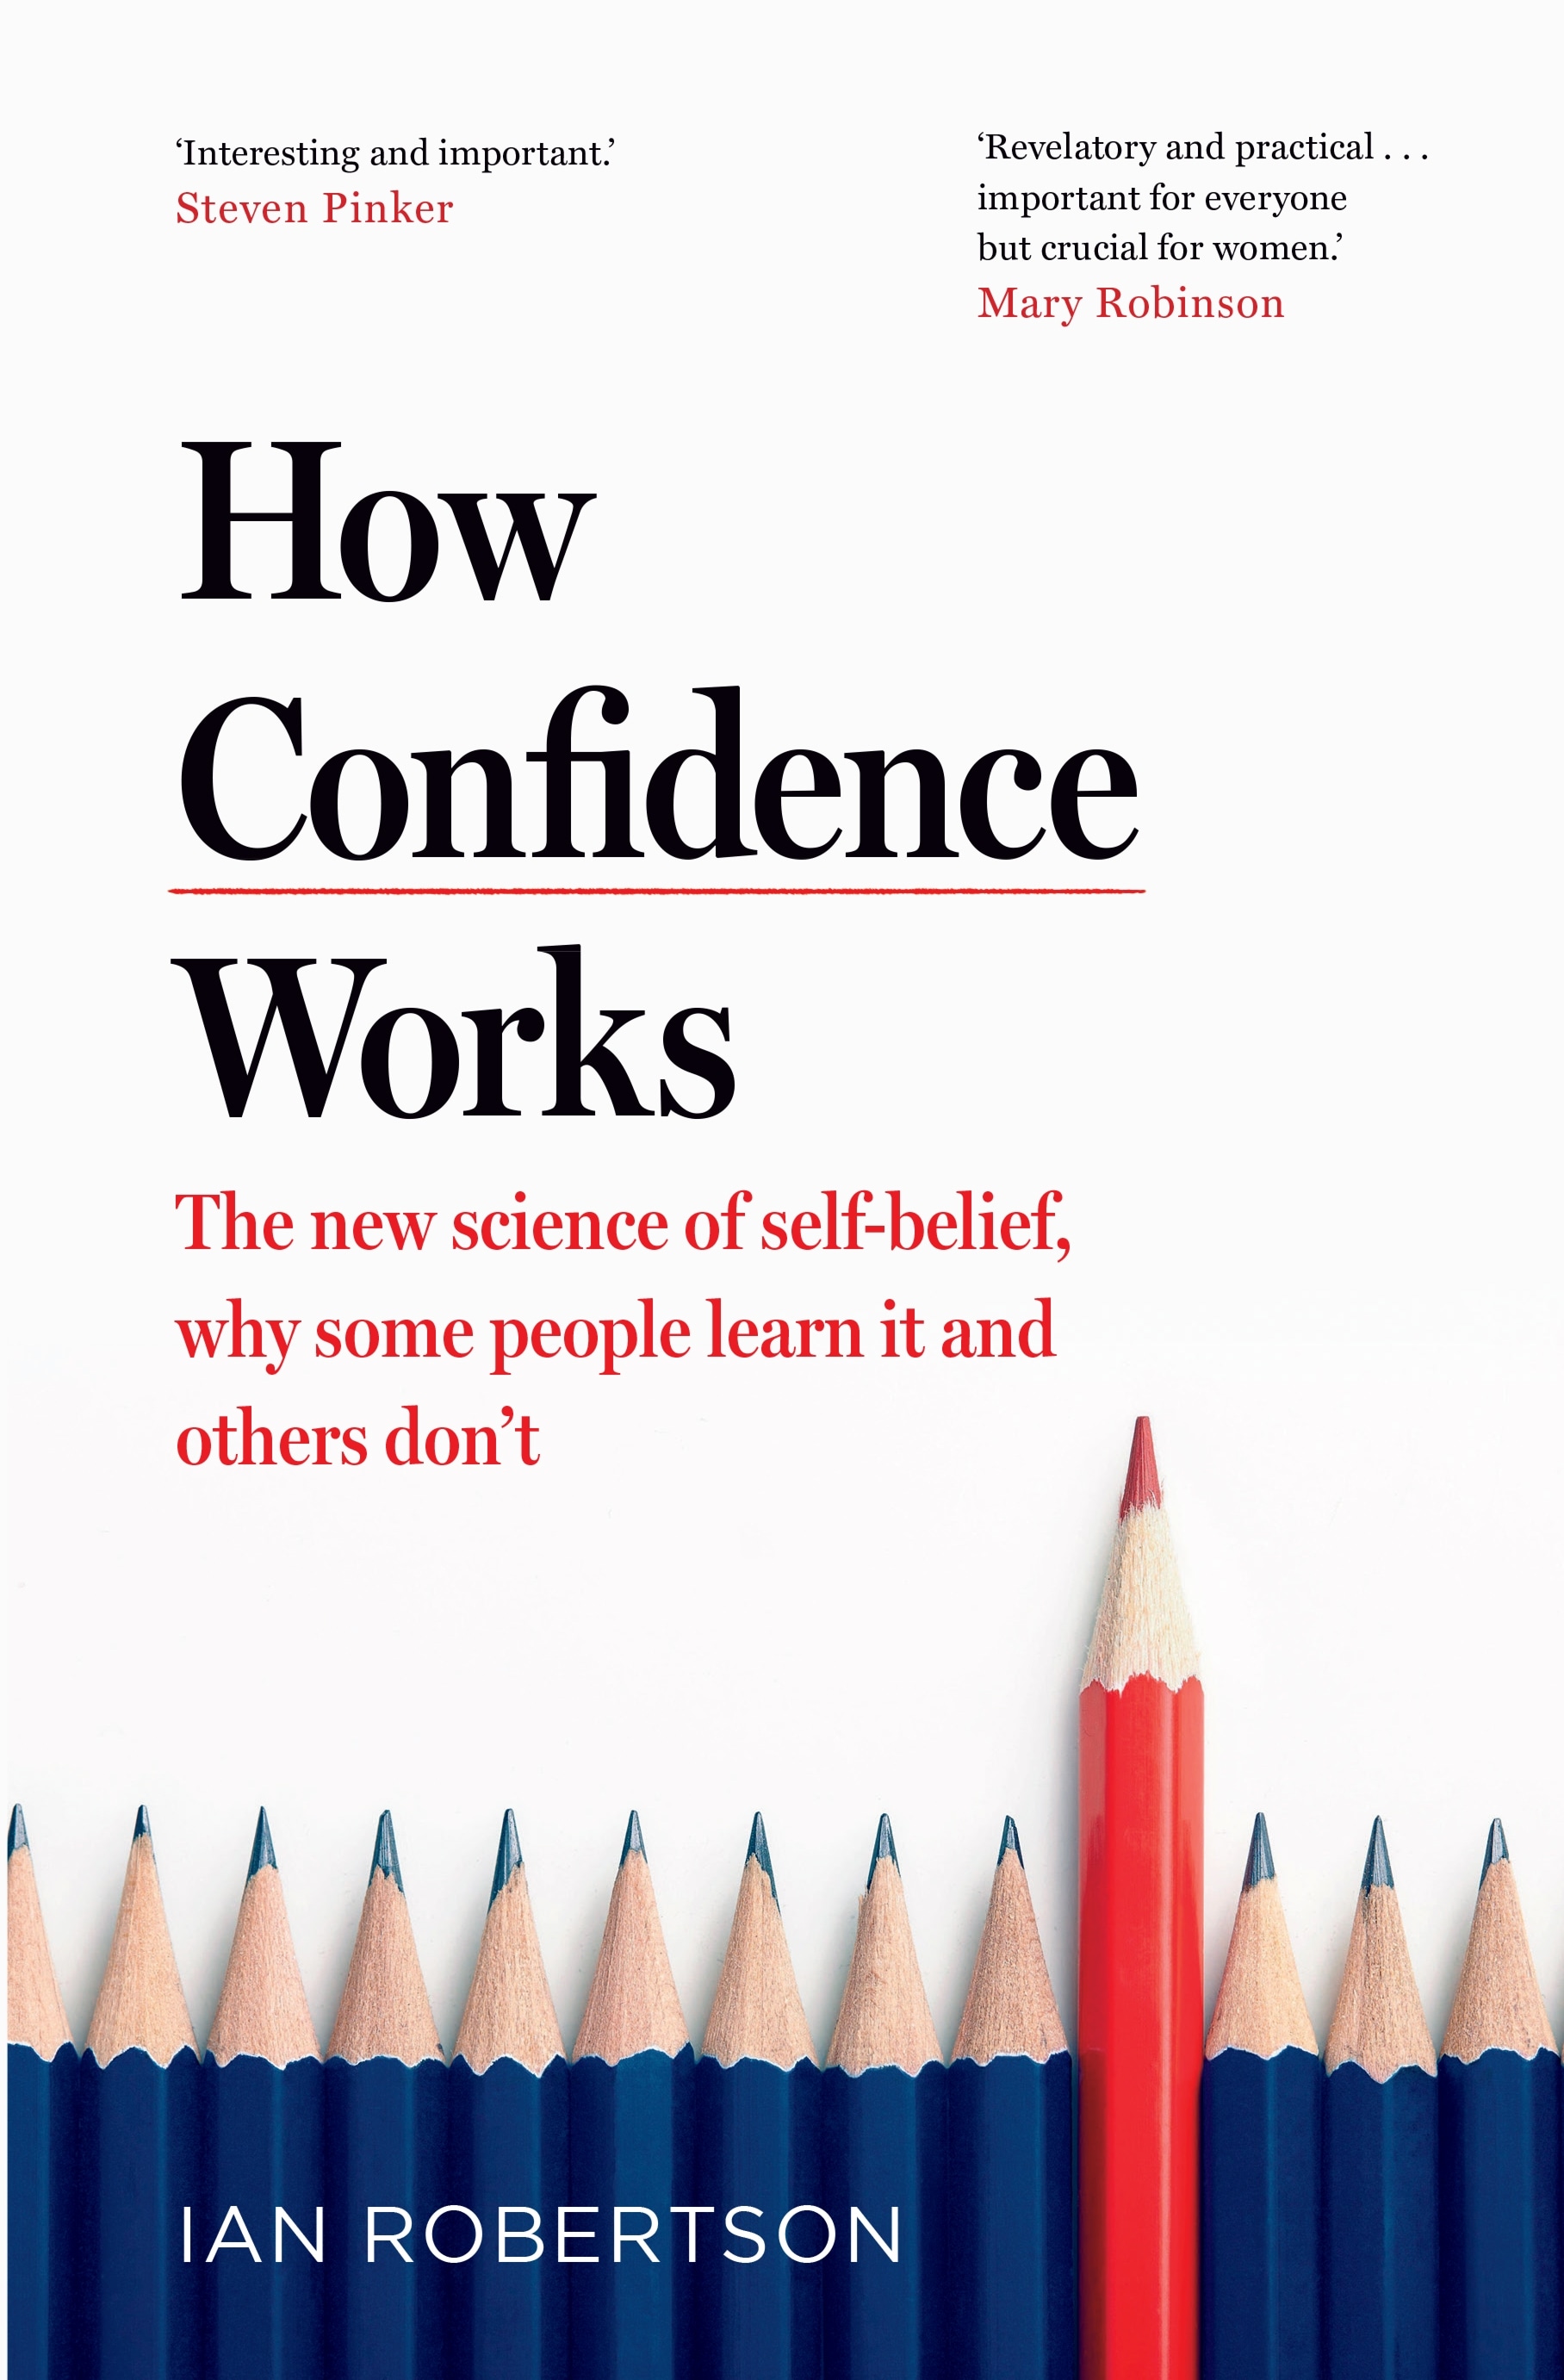 Book “How Confidence Works” by Ian Robertson — June 3, 2021